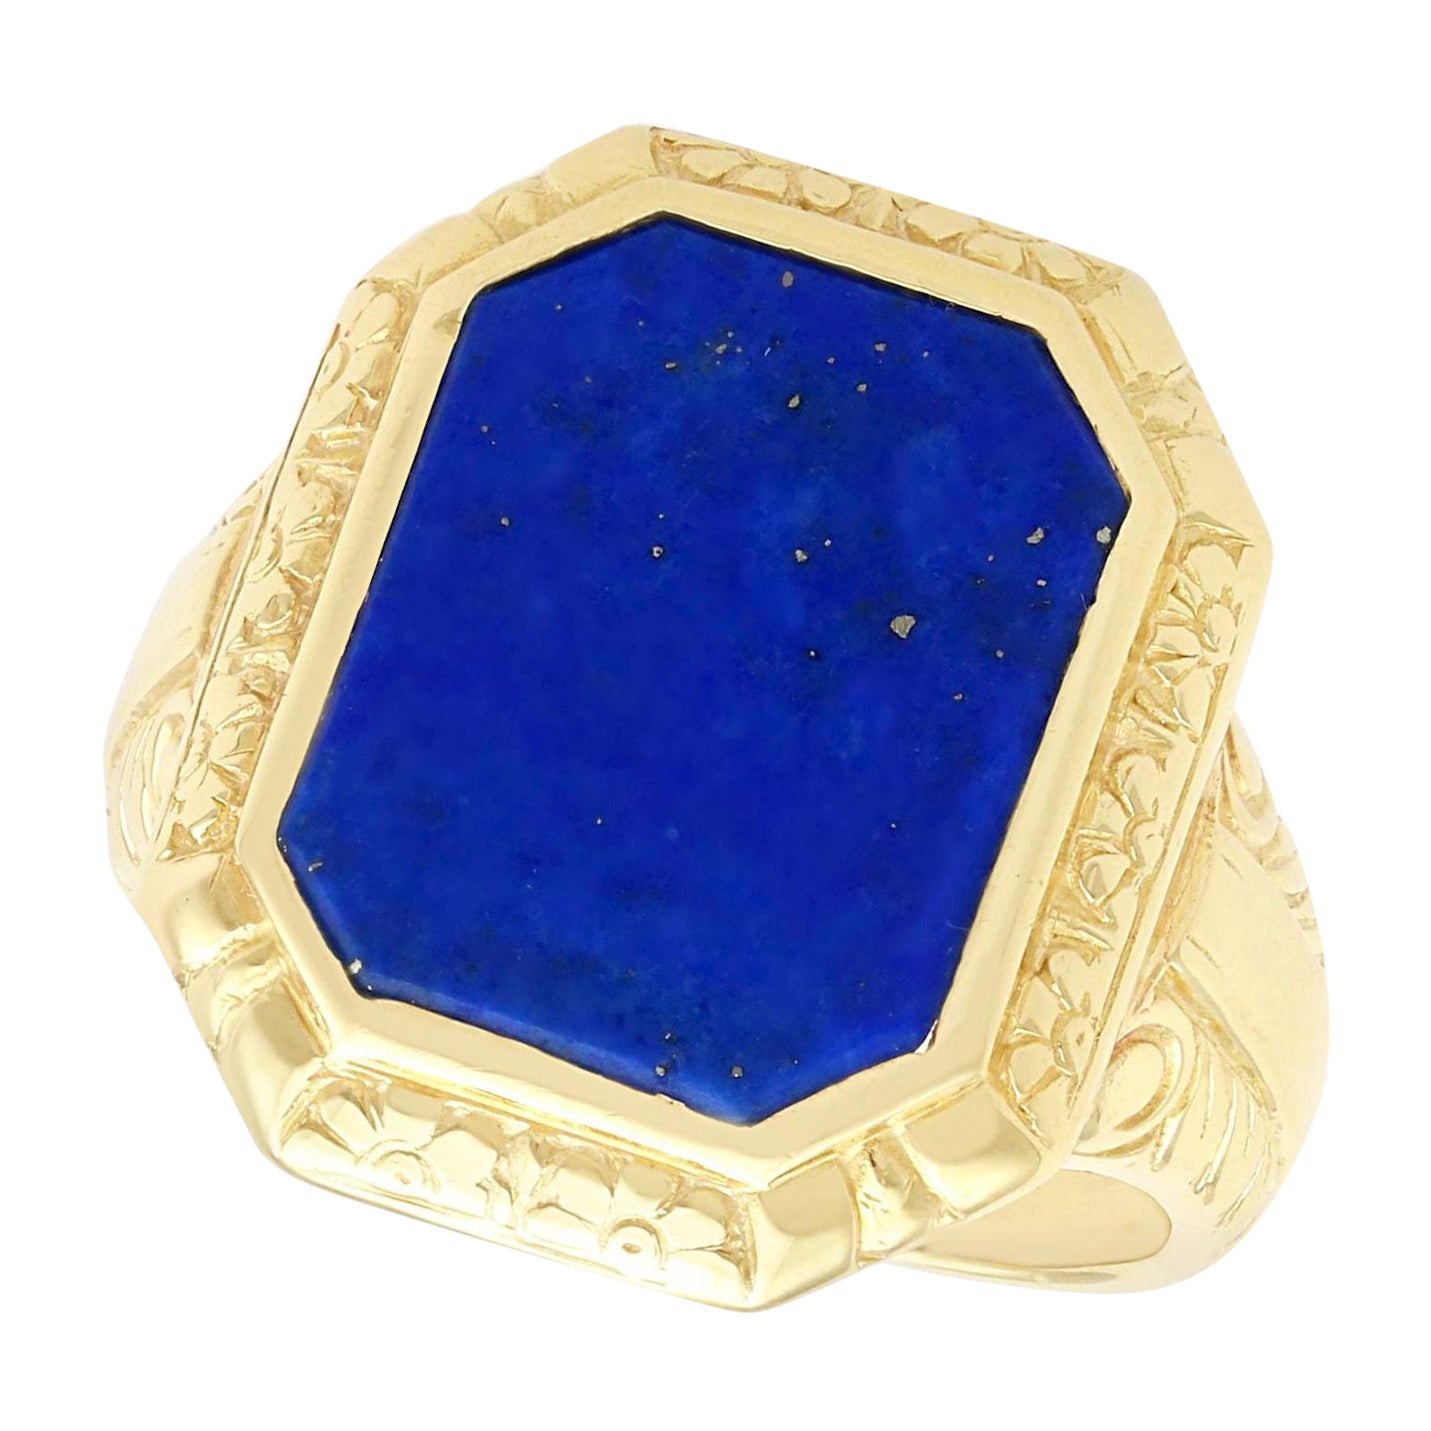 Antique 2.21Ct Lapis Lazuli and 14k Yellow Gold Signet Ring For Sale